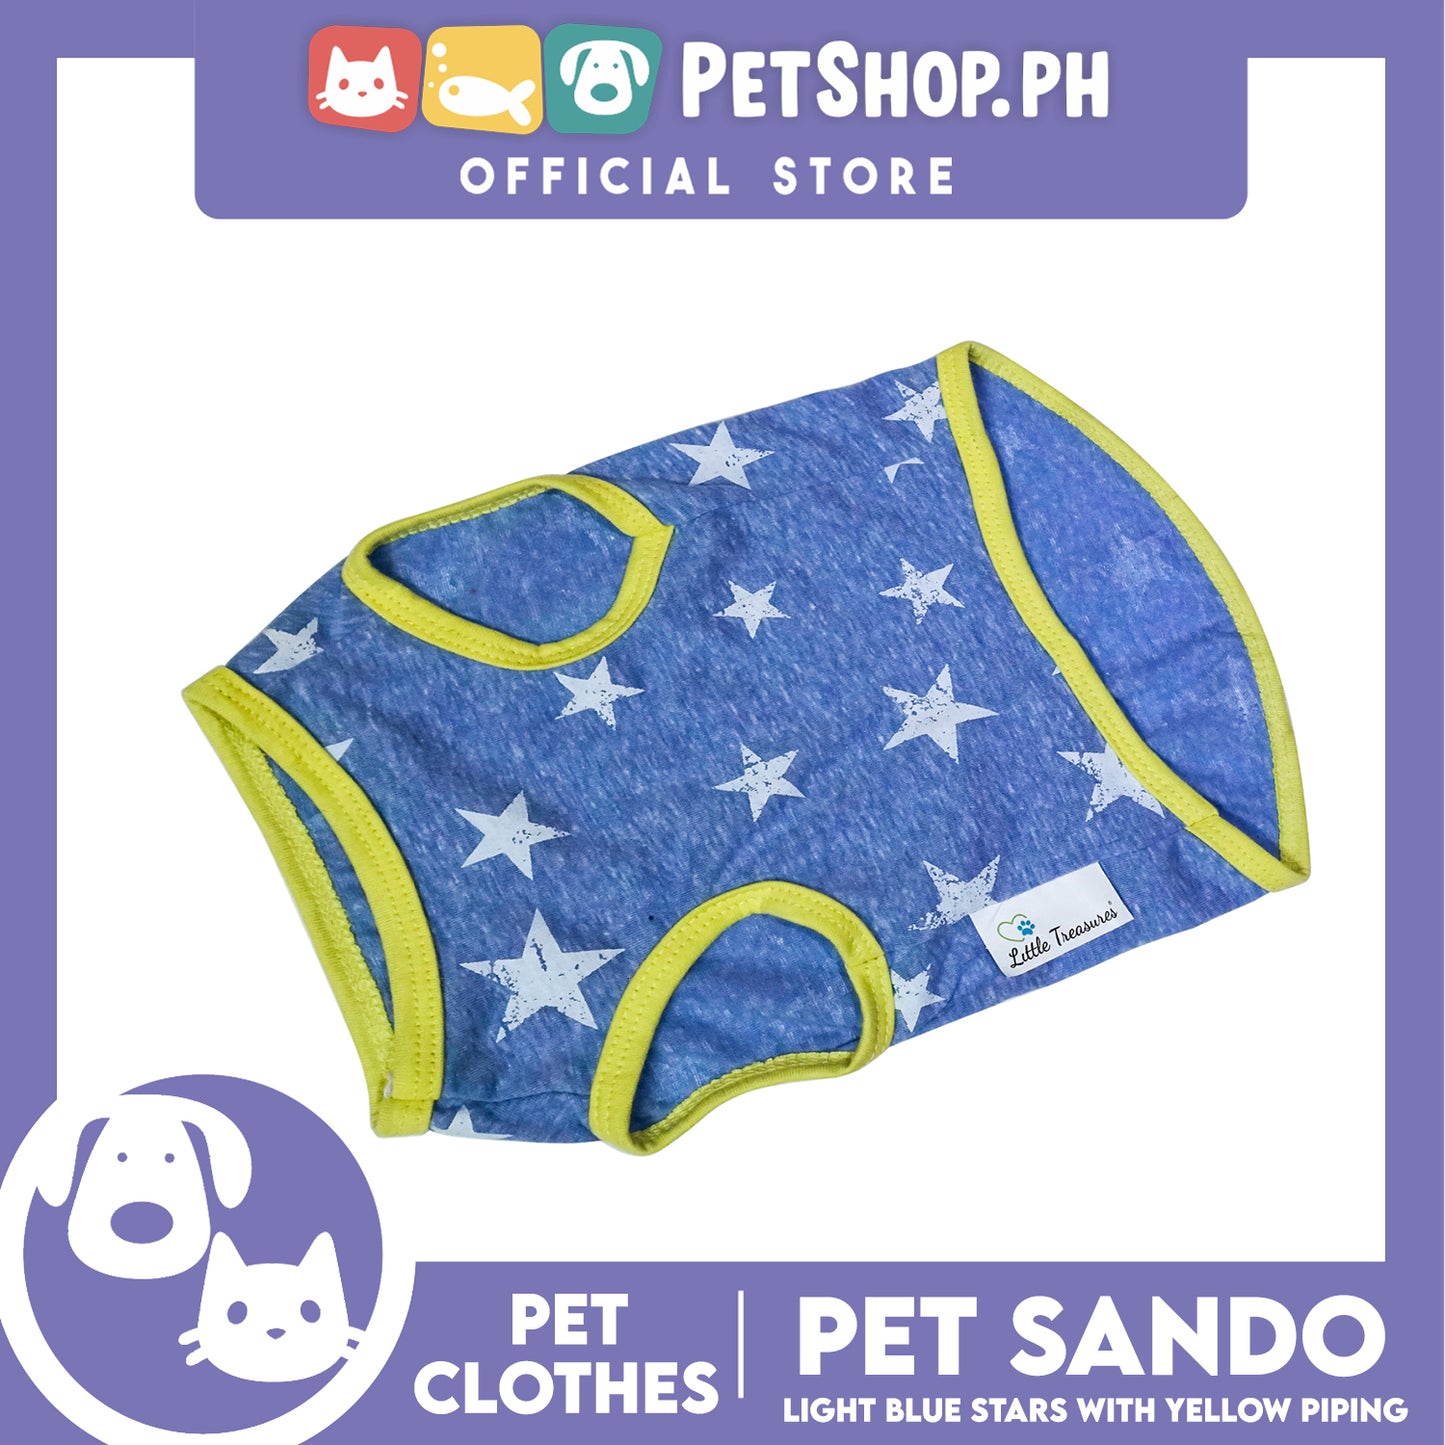 Pet Sando Light Blue Stars with Yellow Piping (Large) Pet Shirt Clothes Perfect fit for Dogs